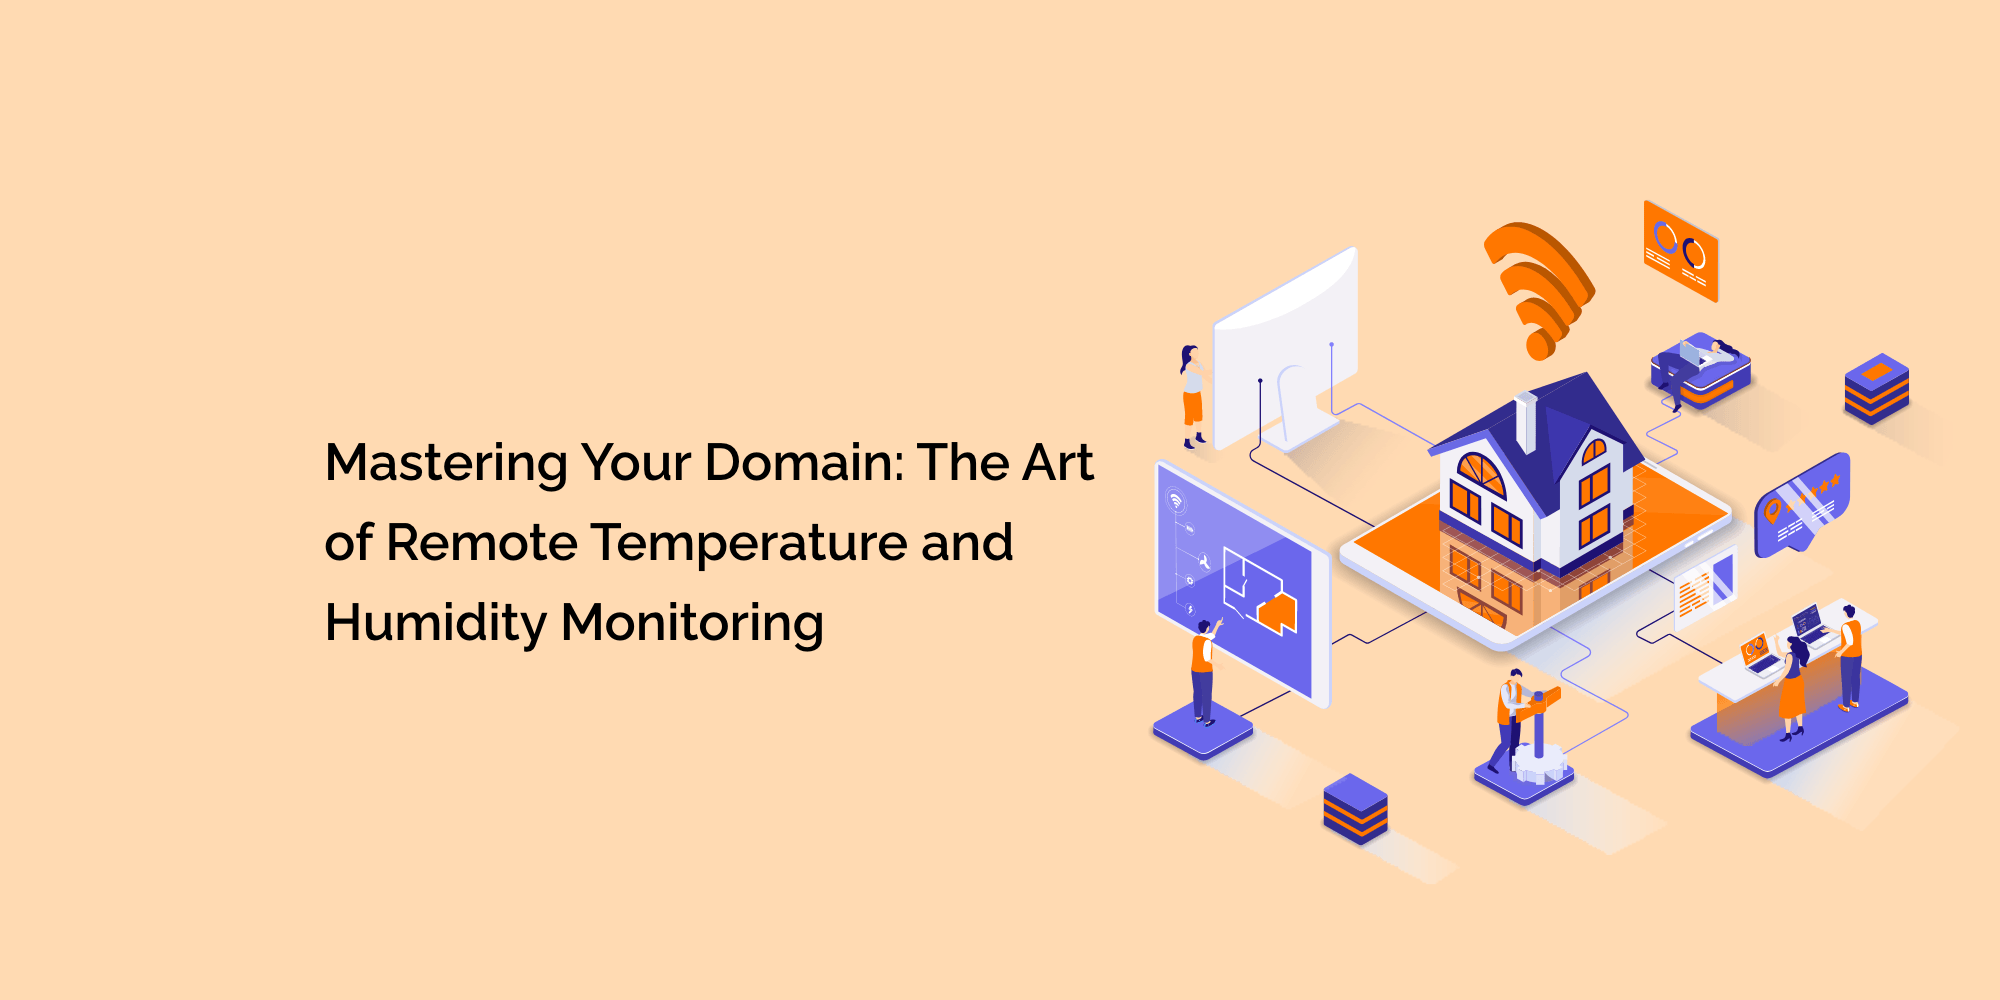 Mastering Your Domain: The Art of Remote Temperature and Humidity Monitoring